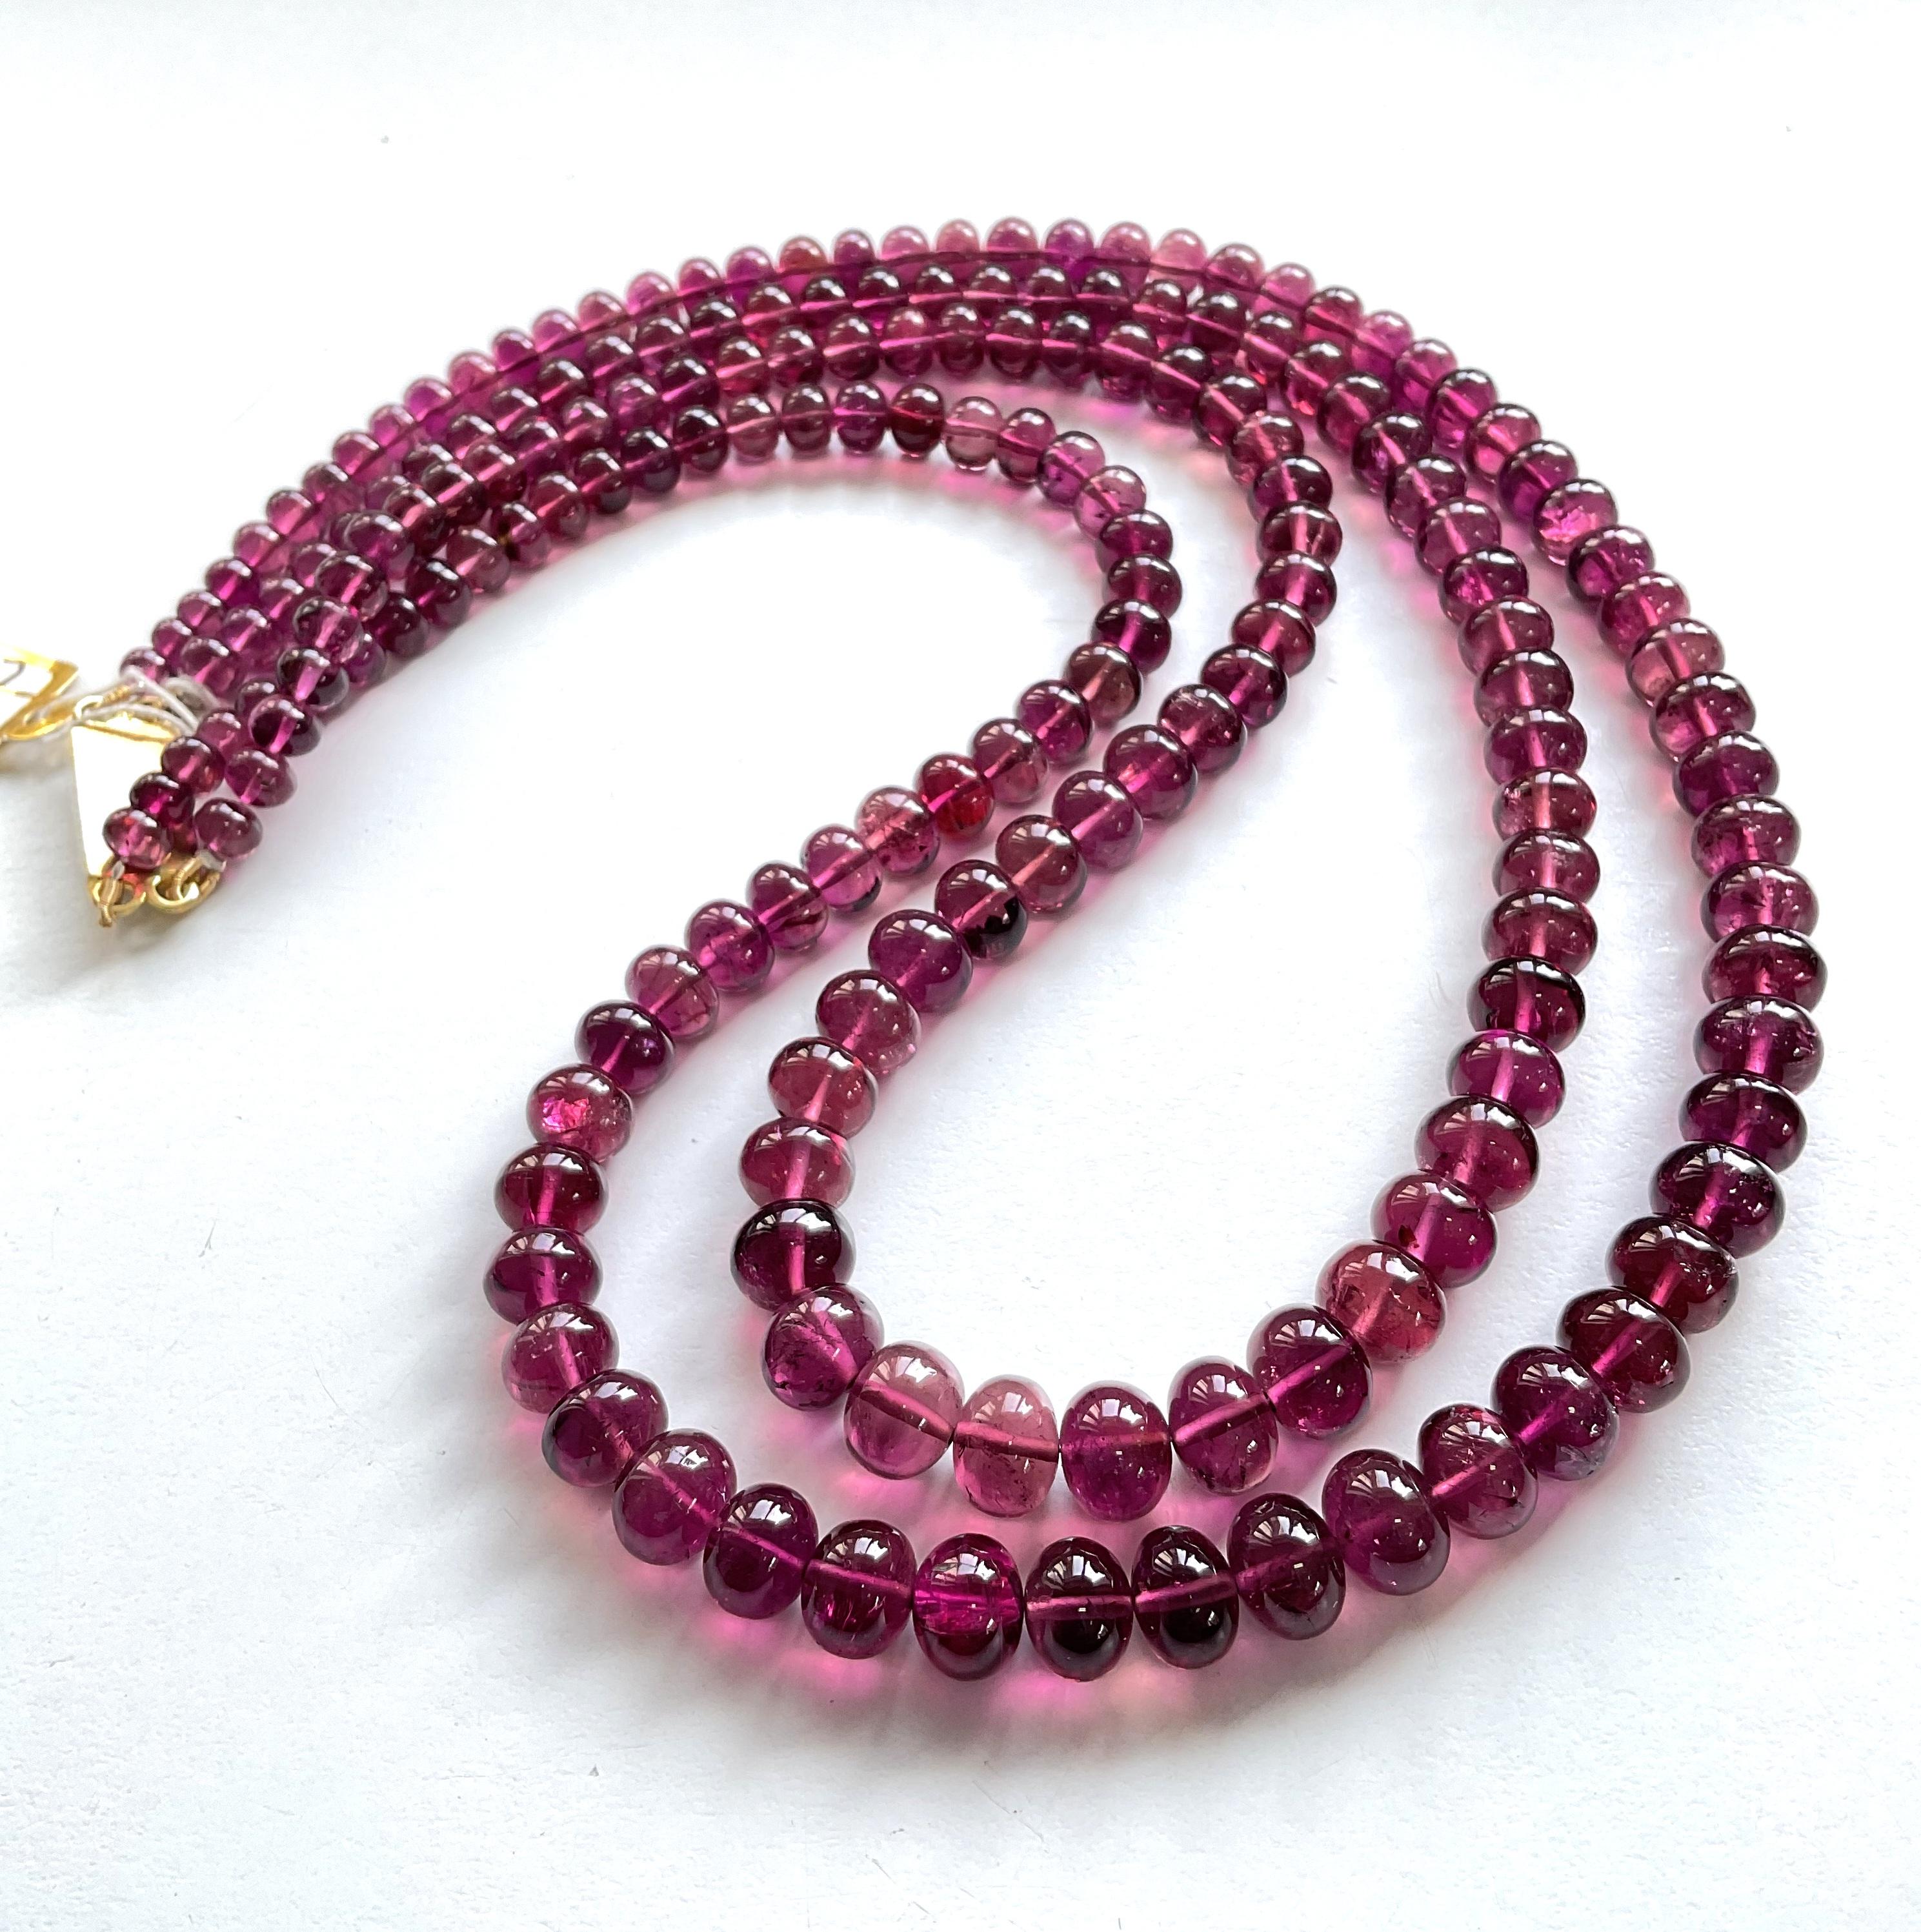 Rubellite Tourmaline Plain Beads For Top Fine Jewelry Natural Gem
Gemstone - Rubellite Tourmaline
Weight -  431.00 Carats
Strand - 2
Size - 5 To 8 MM
Shape - Beads

